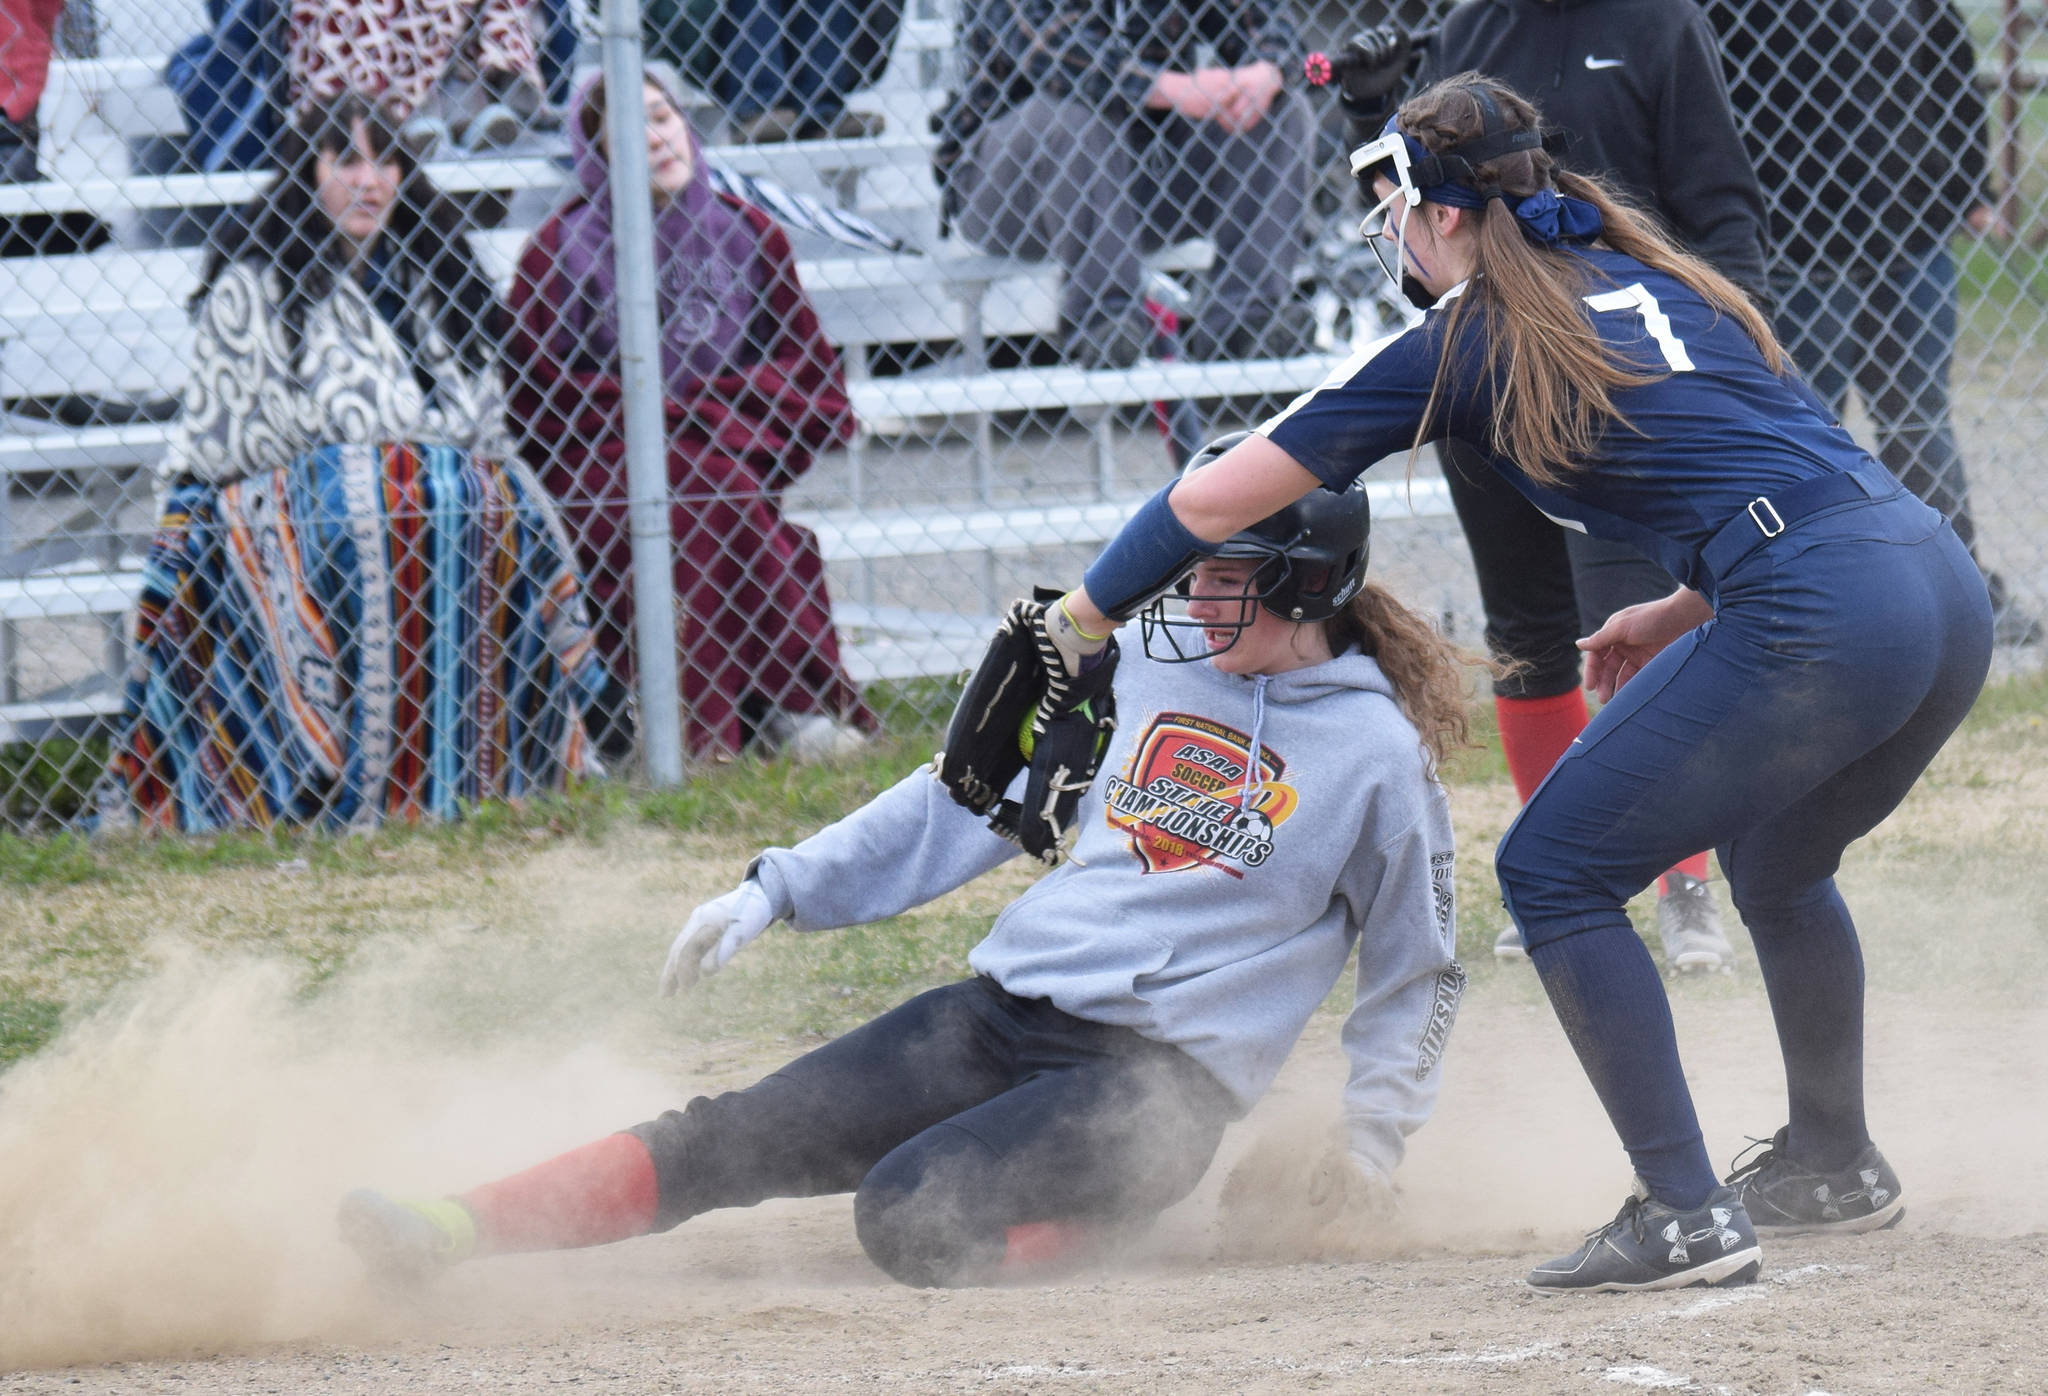 Kenai’s Abby Every slides home in front of the tag of Soldotna pitcher Casey Earll Friday, May 17, 2019, at Steve Shearer Memorial Ballpark in Kenai, Alaska. (Photo by Joey Klecka/Peninsula Clarion)